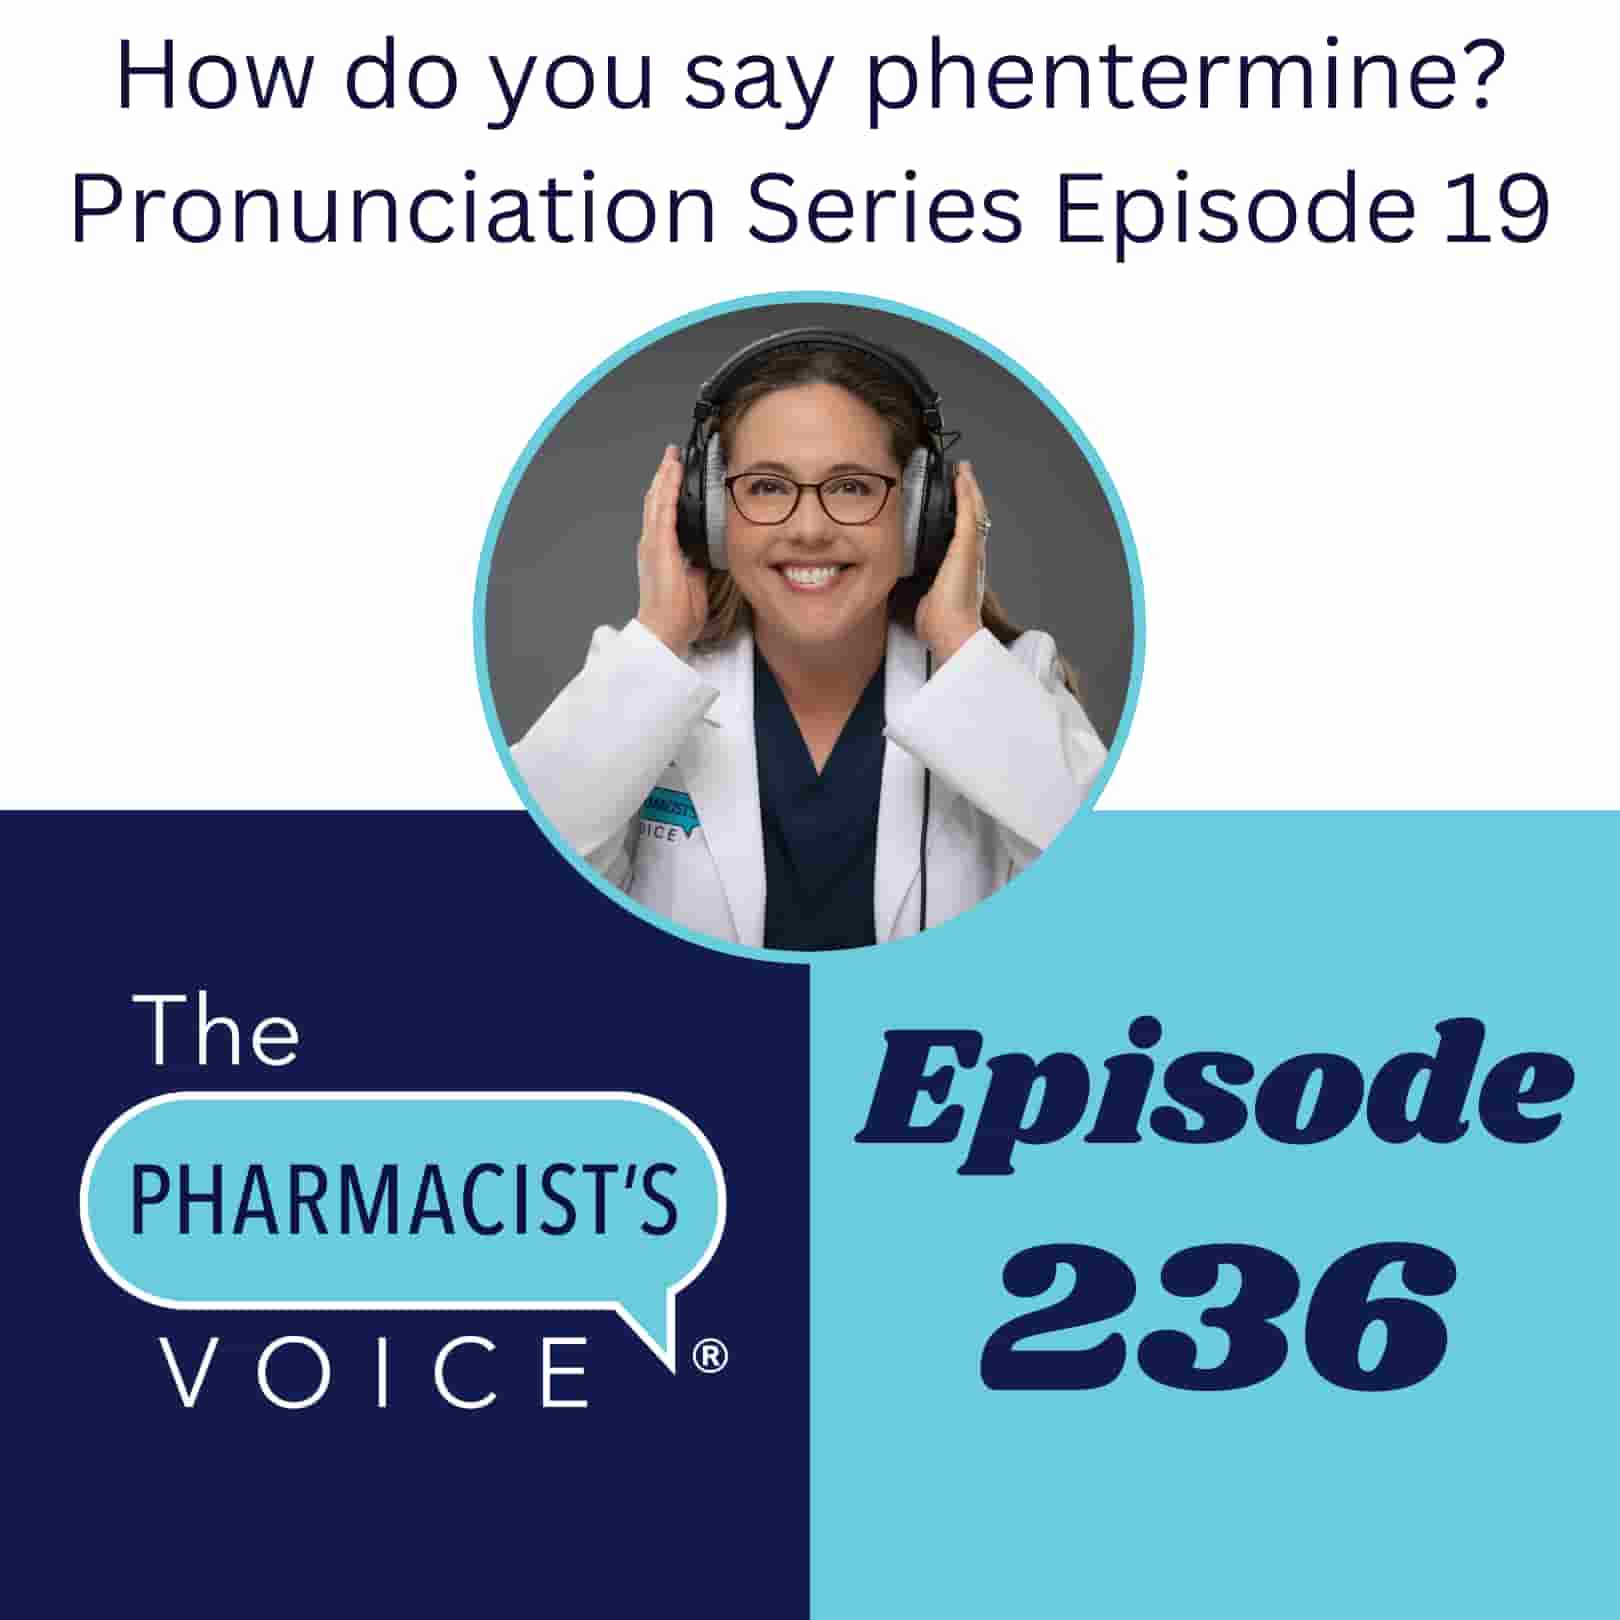 How do you say phentermine? Pronunciation Series Episode 19. The Pharmacist's Voice Podcast Episode 236.